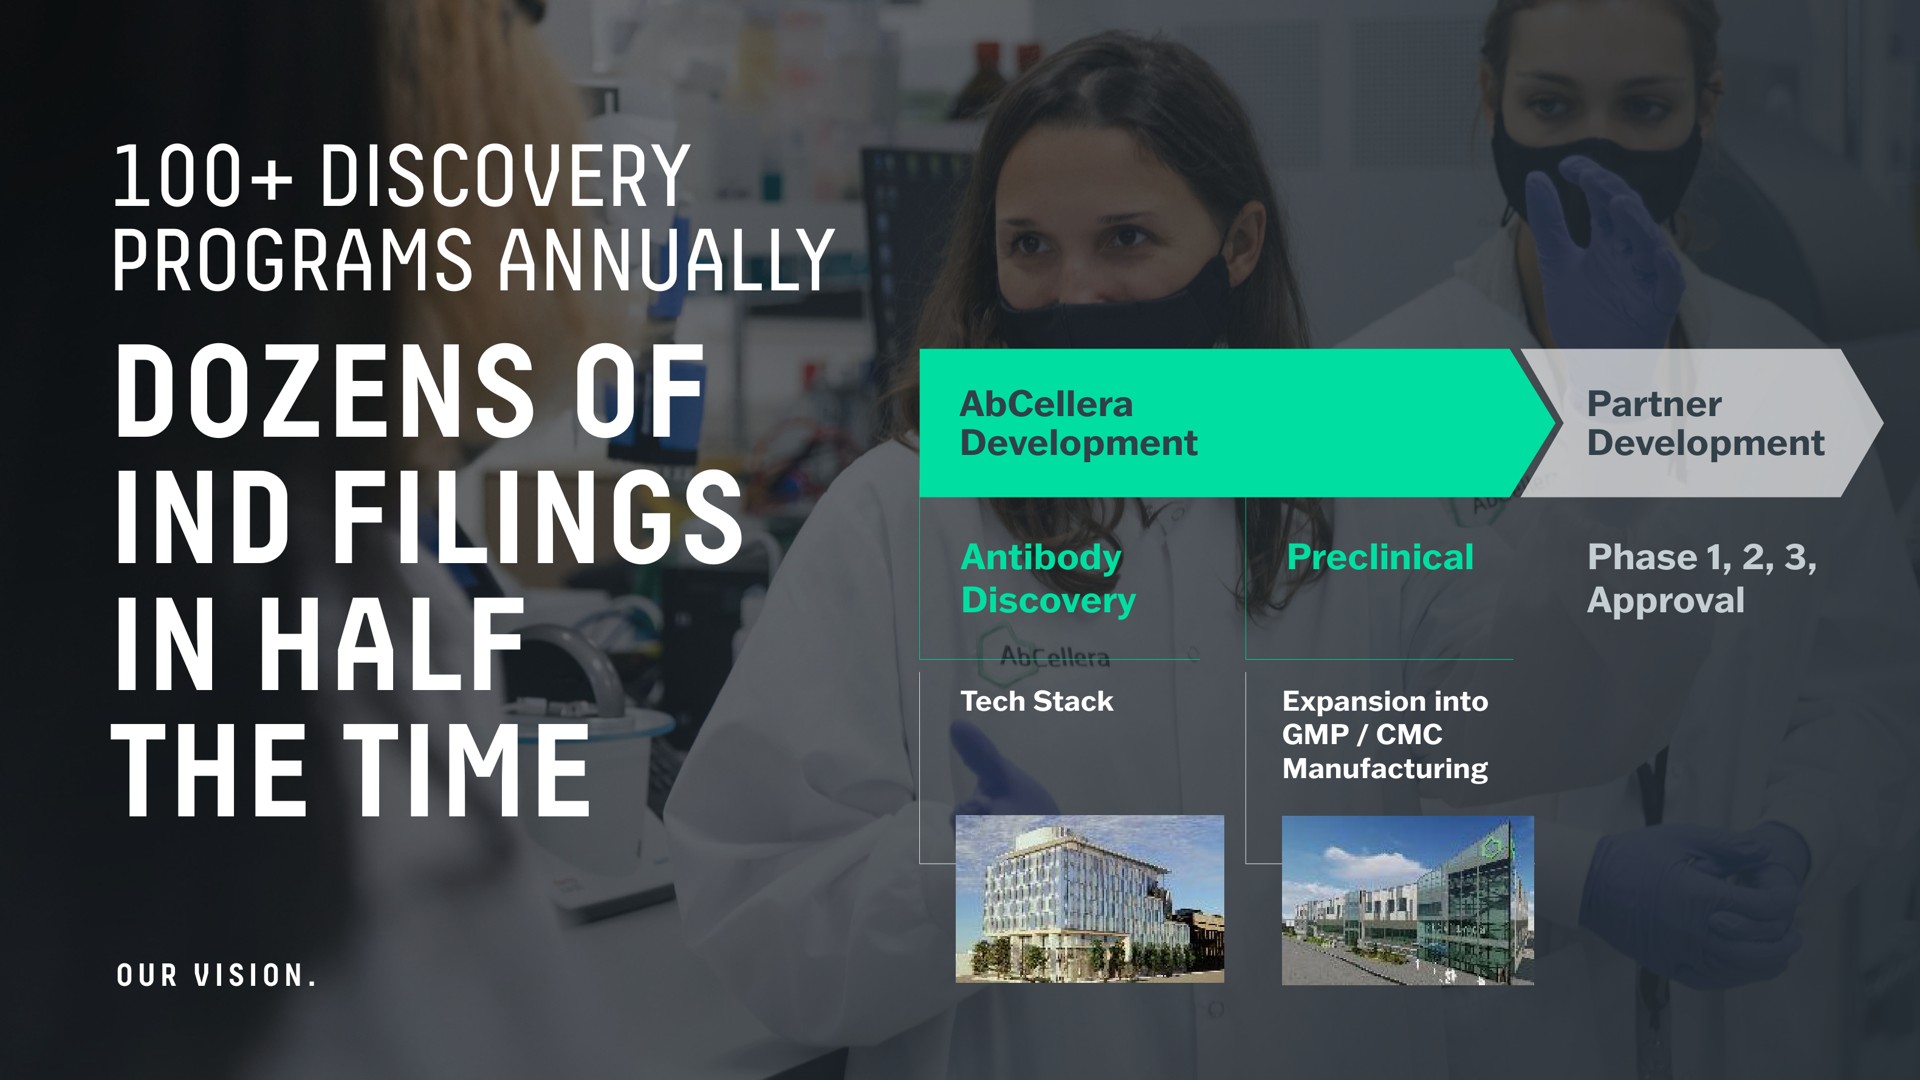 discovery programs annually dozens of filings in half the time | AbCellera